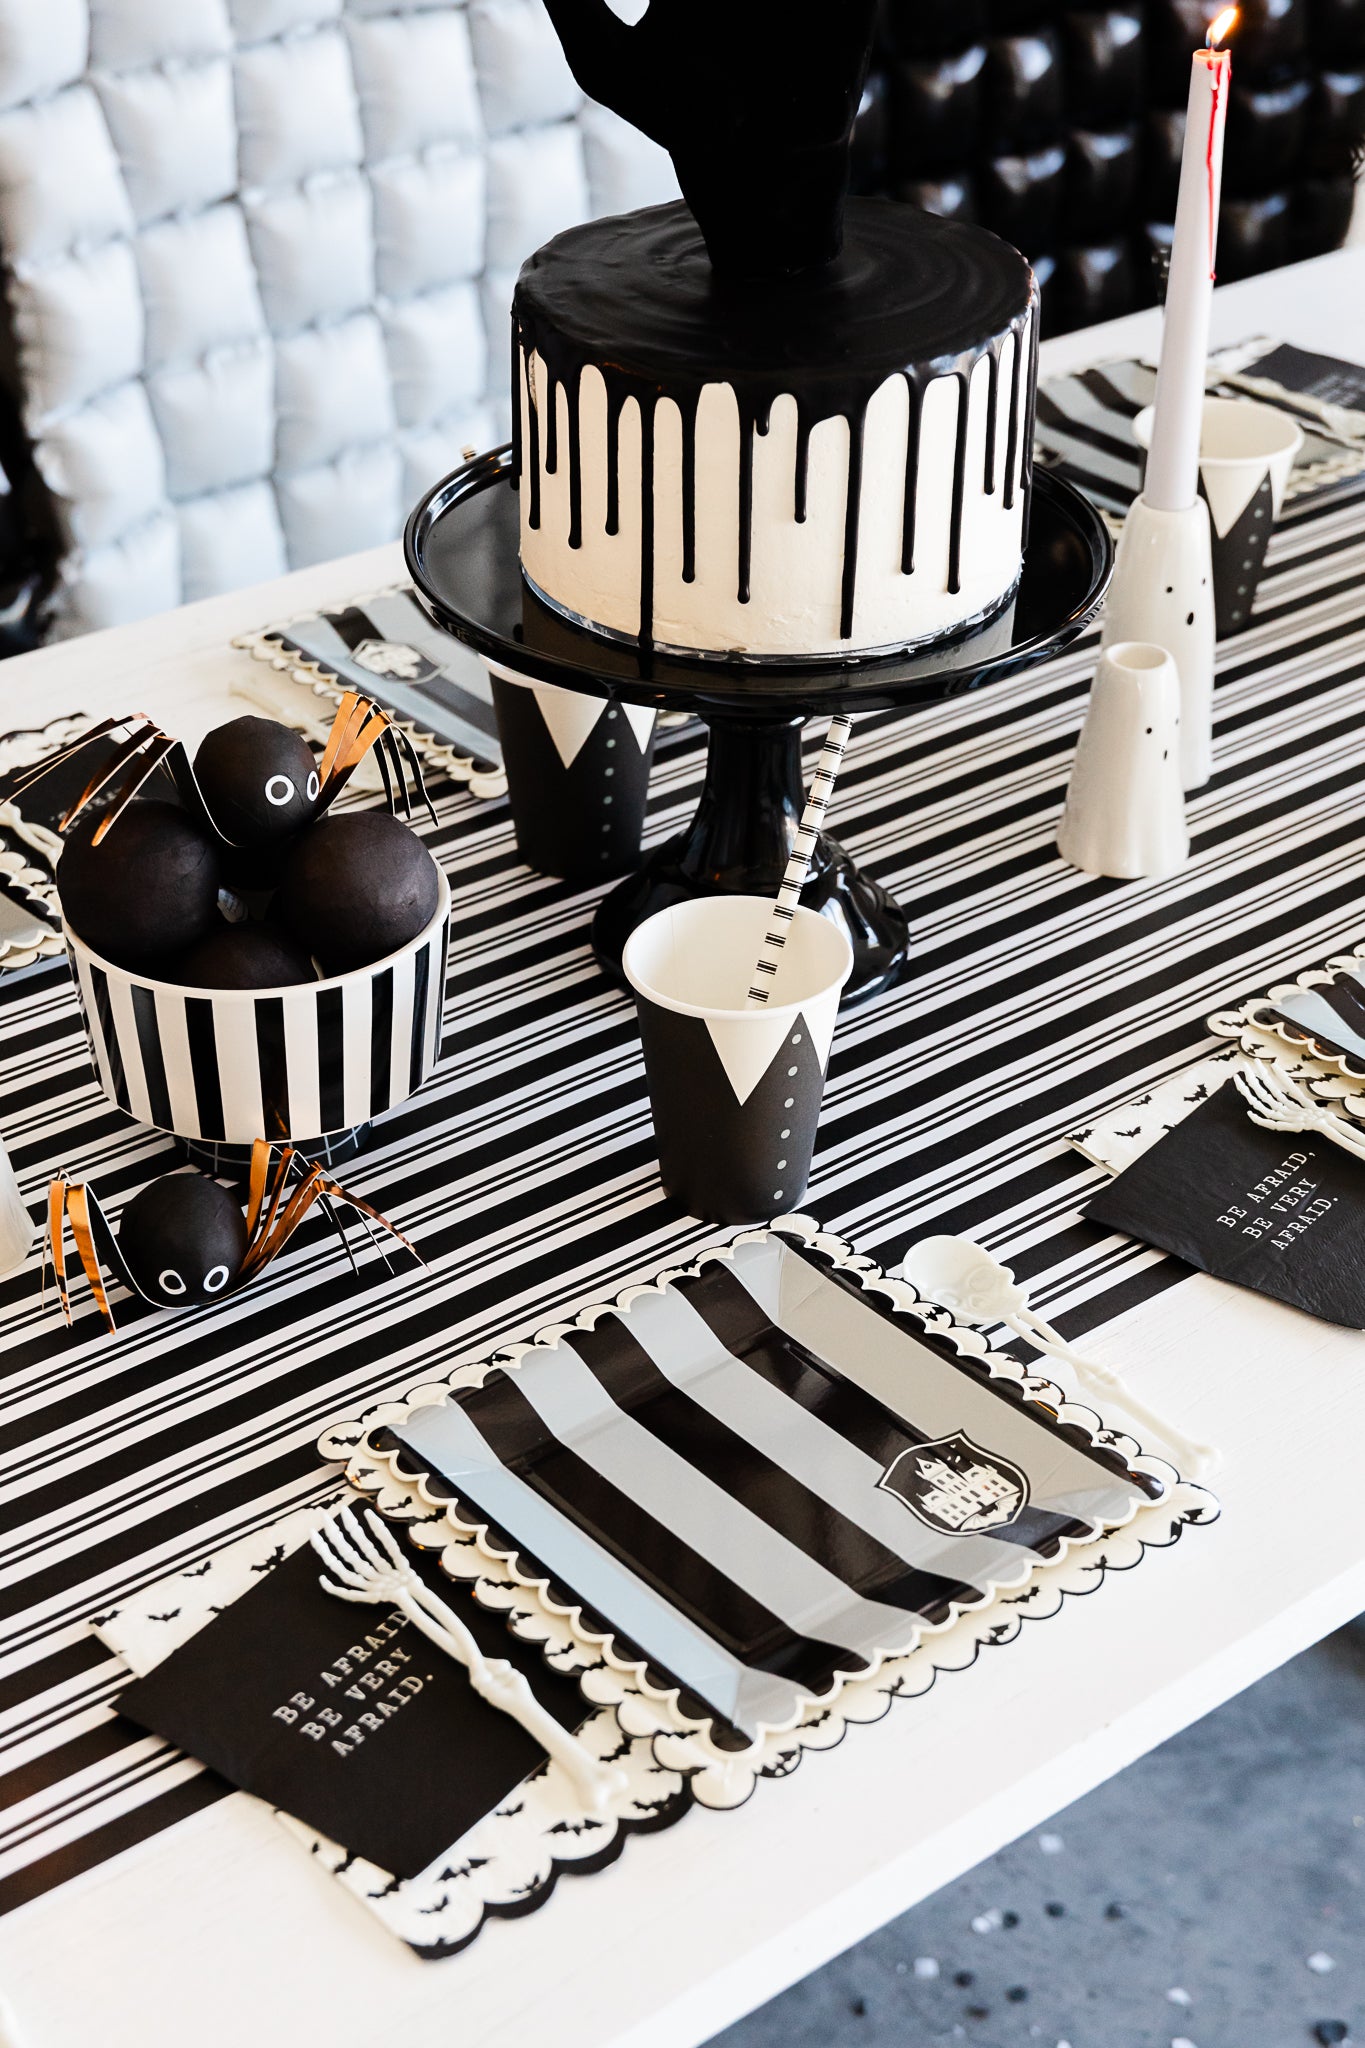 Wednesday Addams theme party supplies